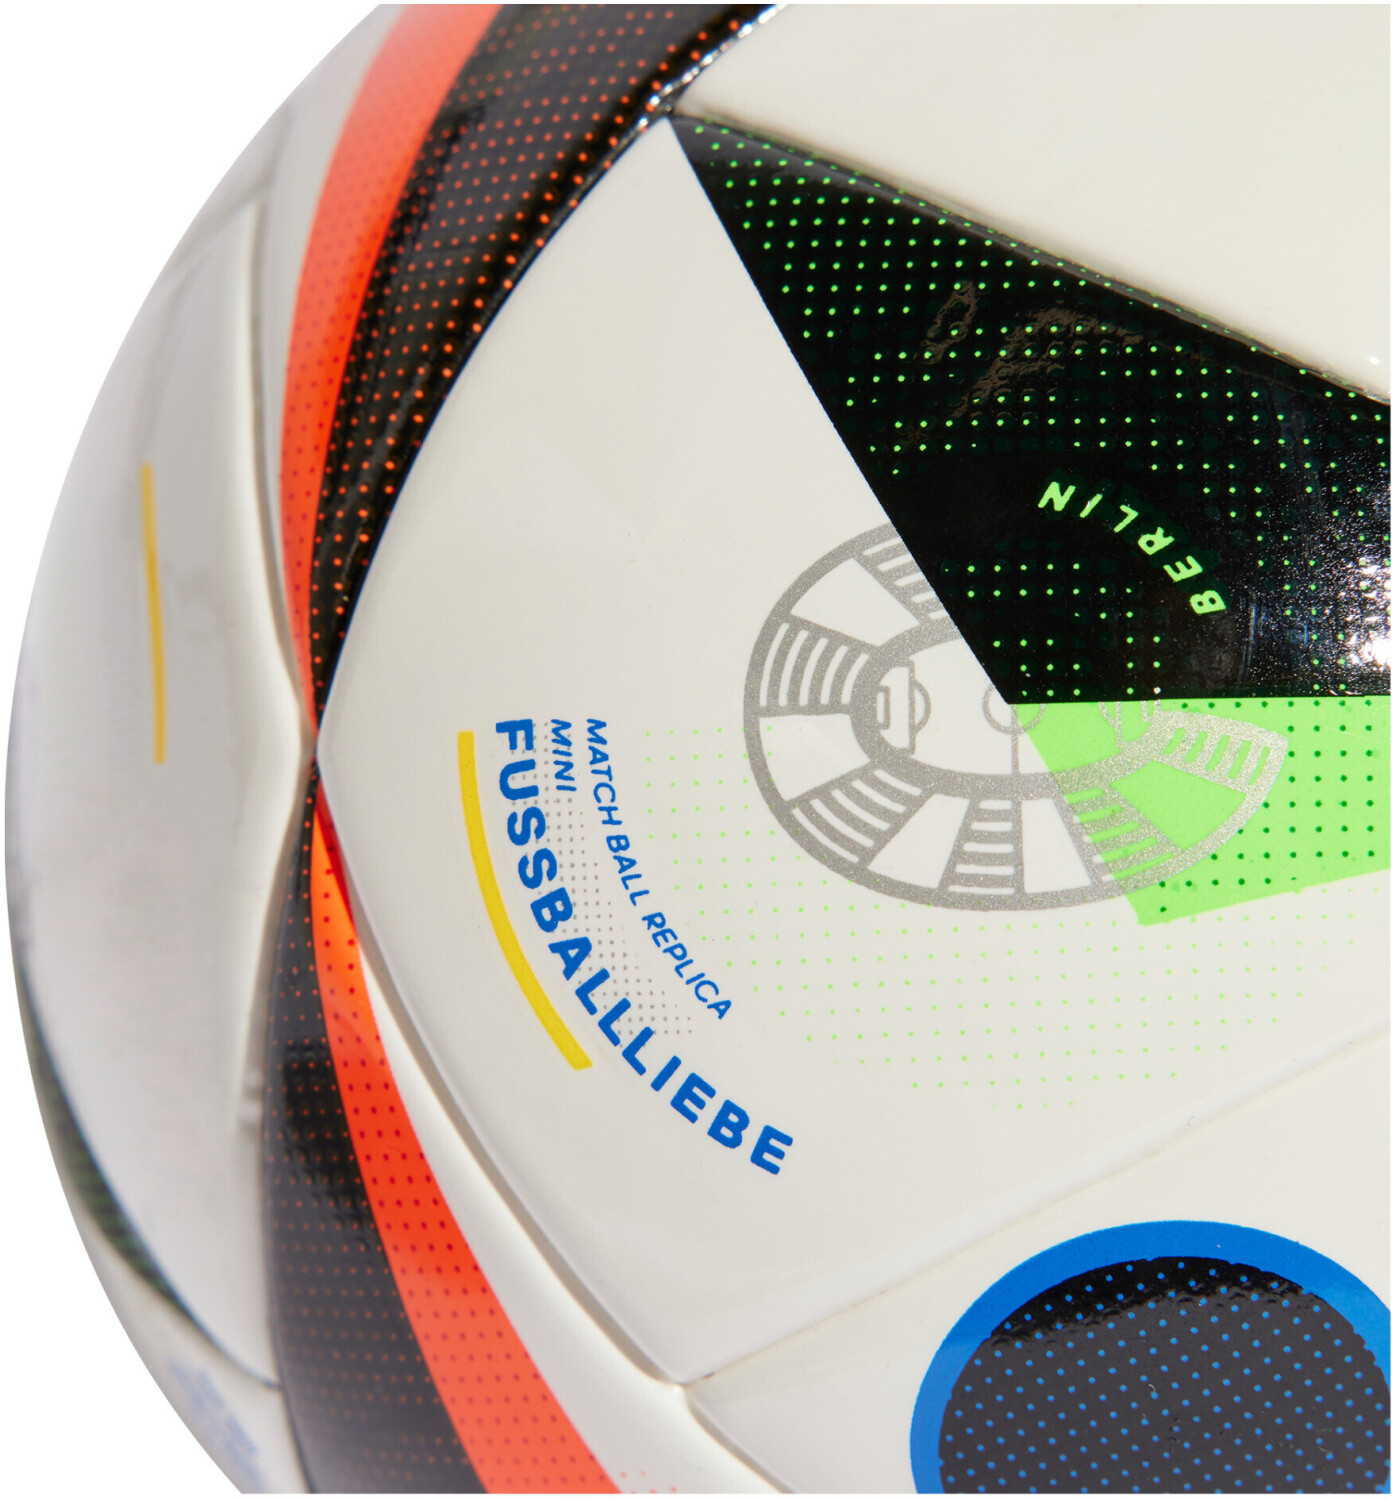 Buy (Today) Deals on Adidas (EURO24) Fußballliebe Mini from £10.99 Best –